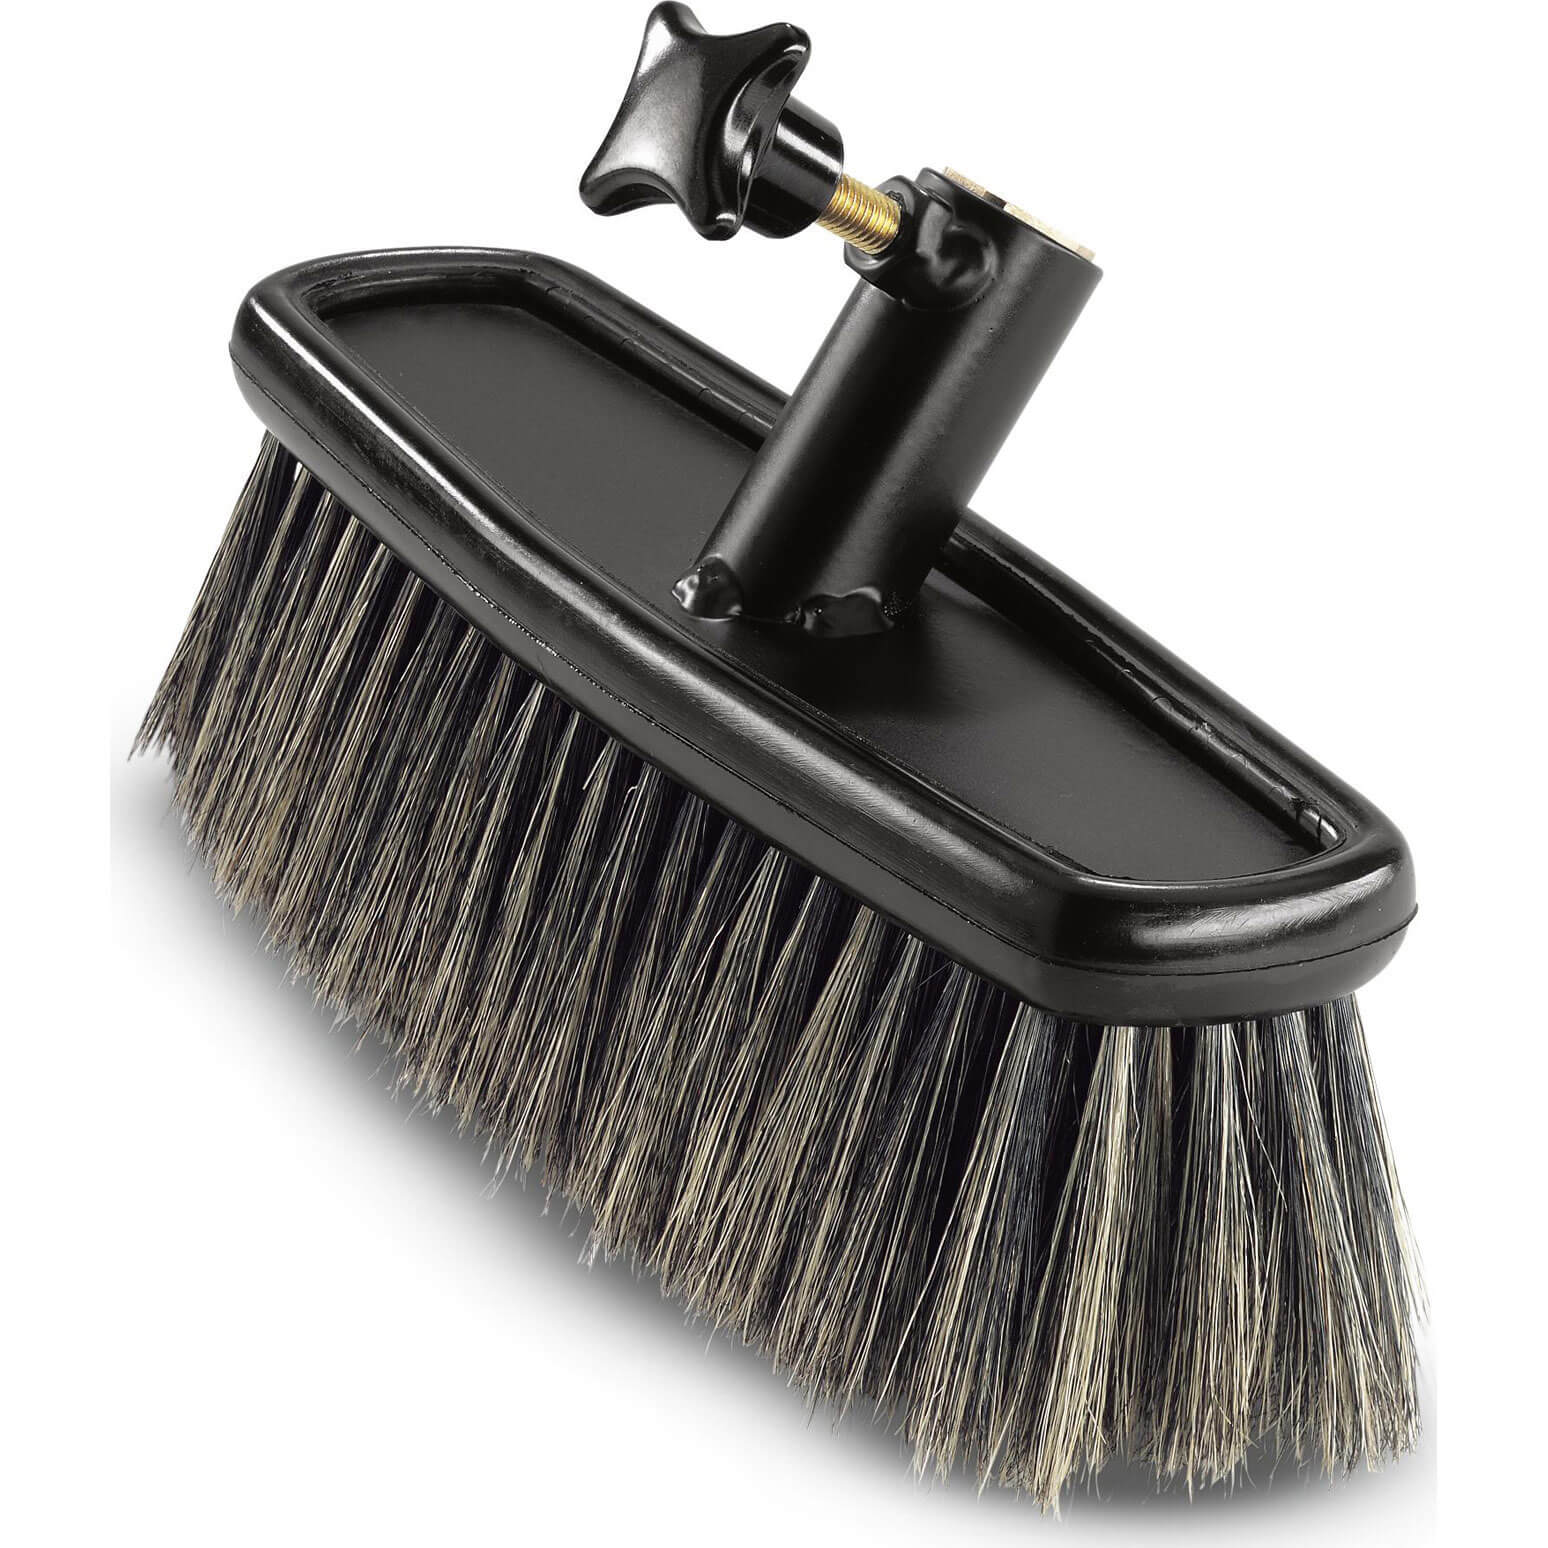 Karcher Push-on Wash Brush for HD and XPERT Pressure Washers (Not Easy!Lock)